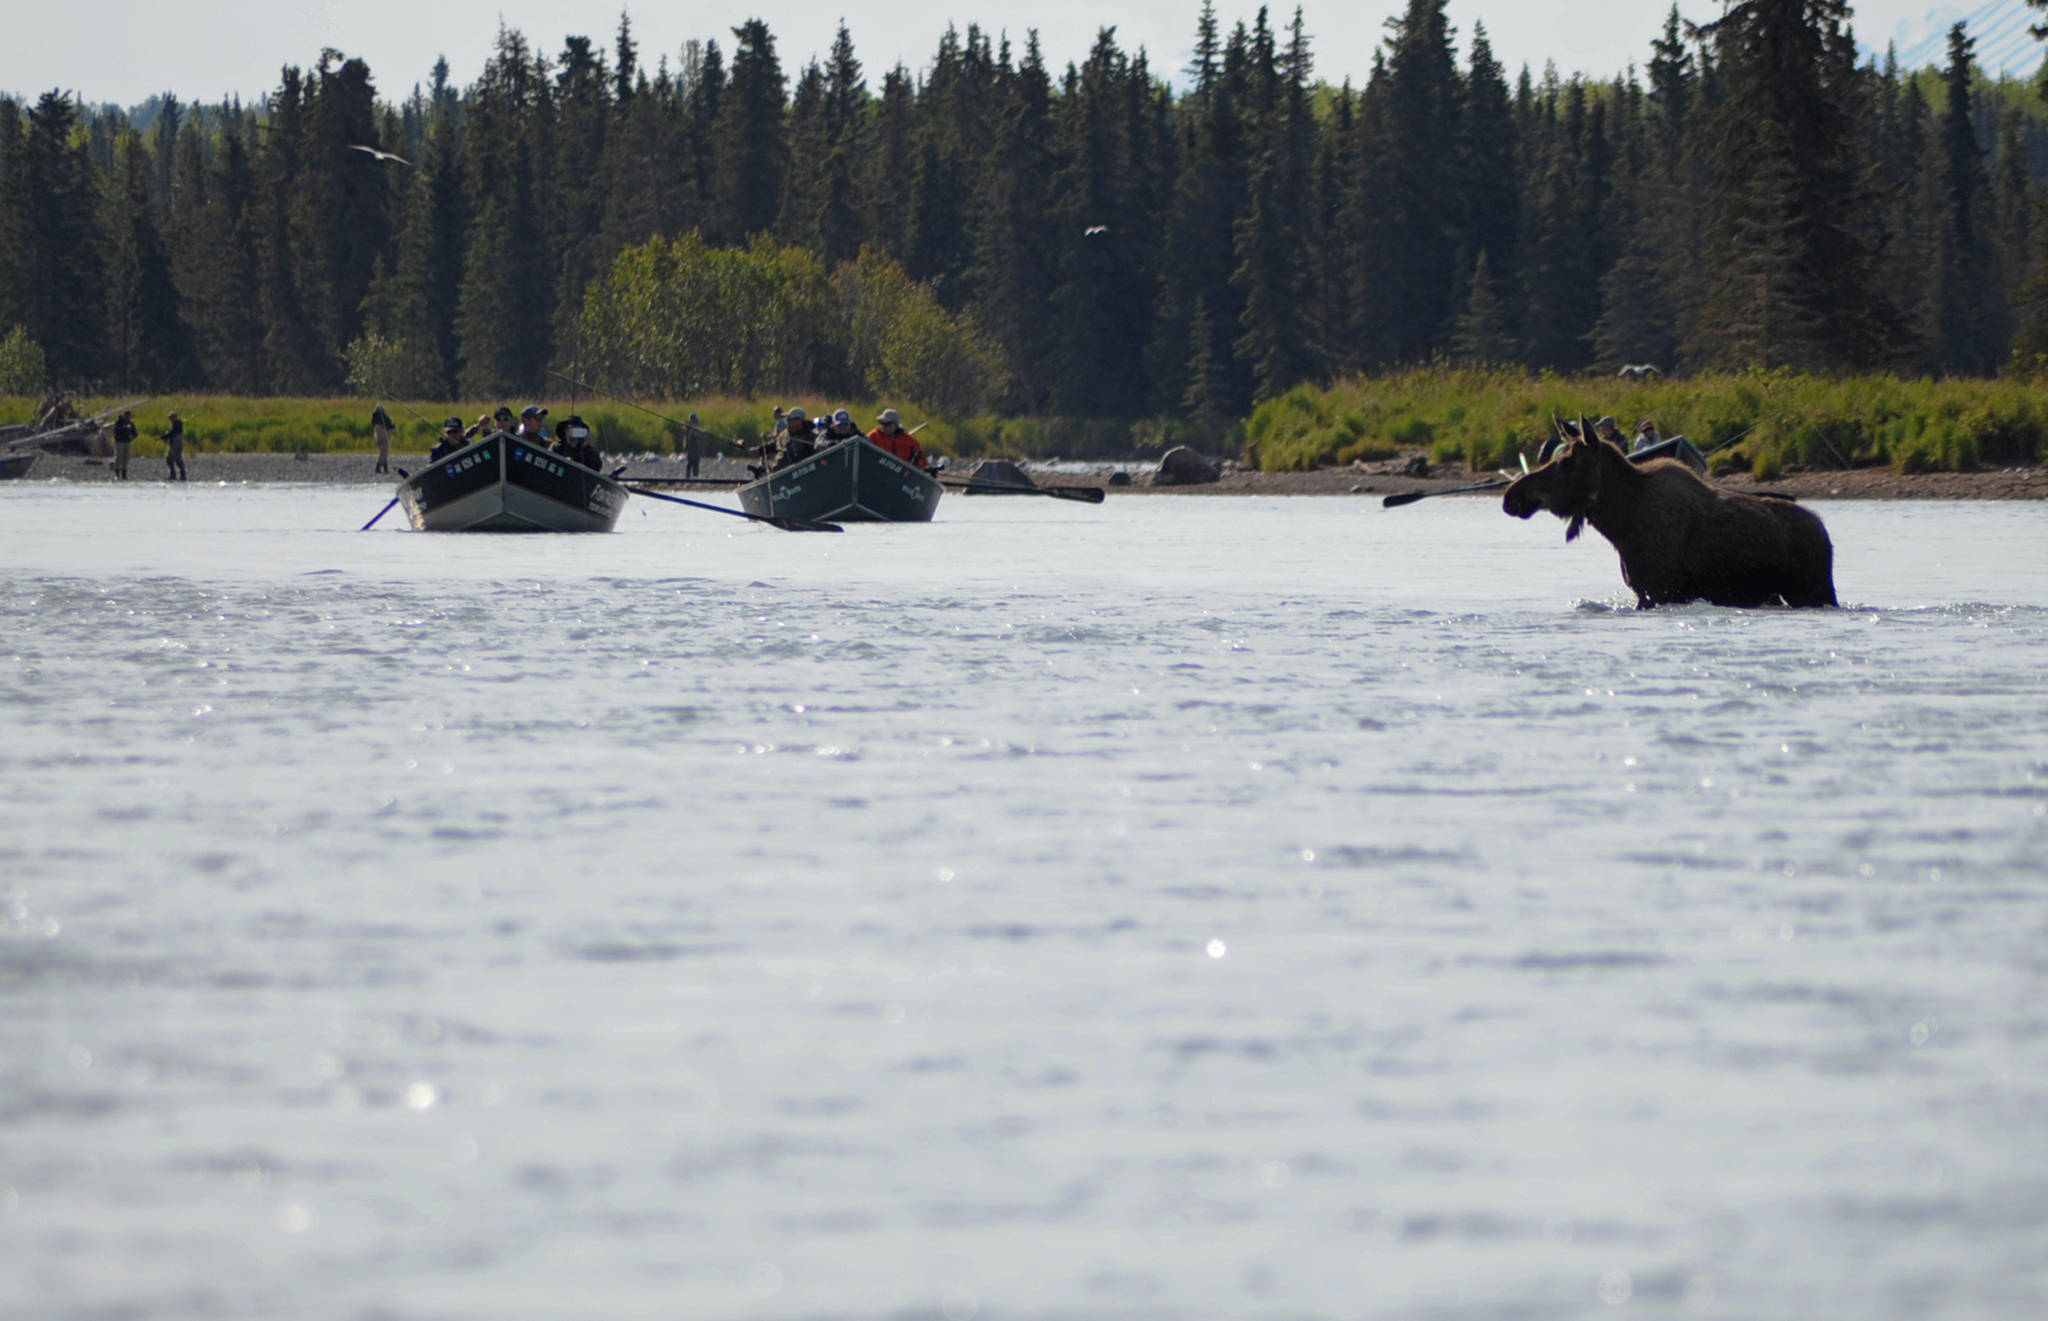 A young cow moose makes her way across the Kasilof River amid a crowd of guided anglers Monday, June 19, 2017 in Kasilof, Alaska. Monday can be a busy day on the Kasilof for guides, as the Kenai River is closed to motor boat use and many head to the Kasilof. Though sockeye are starting to enter the river, most of the anglers are still targeting king salmon. Though Kasilof River has king salmon runs of both wild and hatchery king salmon, and anglers can only retain wild king salmon on Tuesdays, Thursdays and Saturdays. (Photo by Elizabeth Earl/Peninsula Clarion)